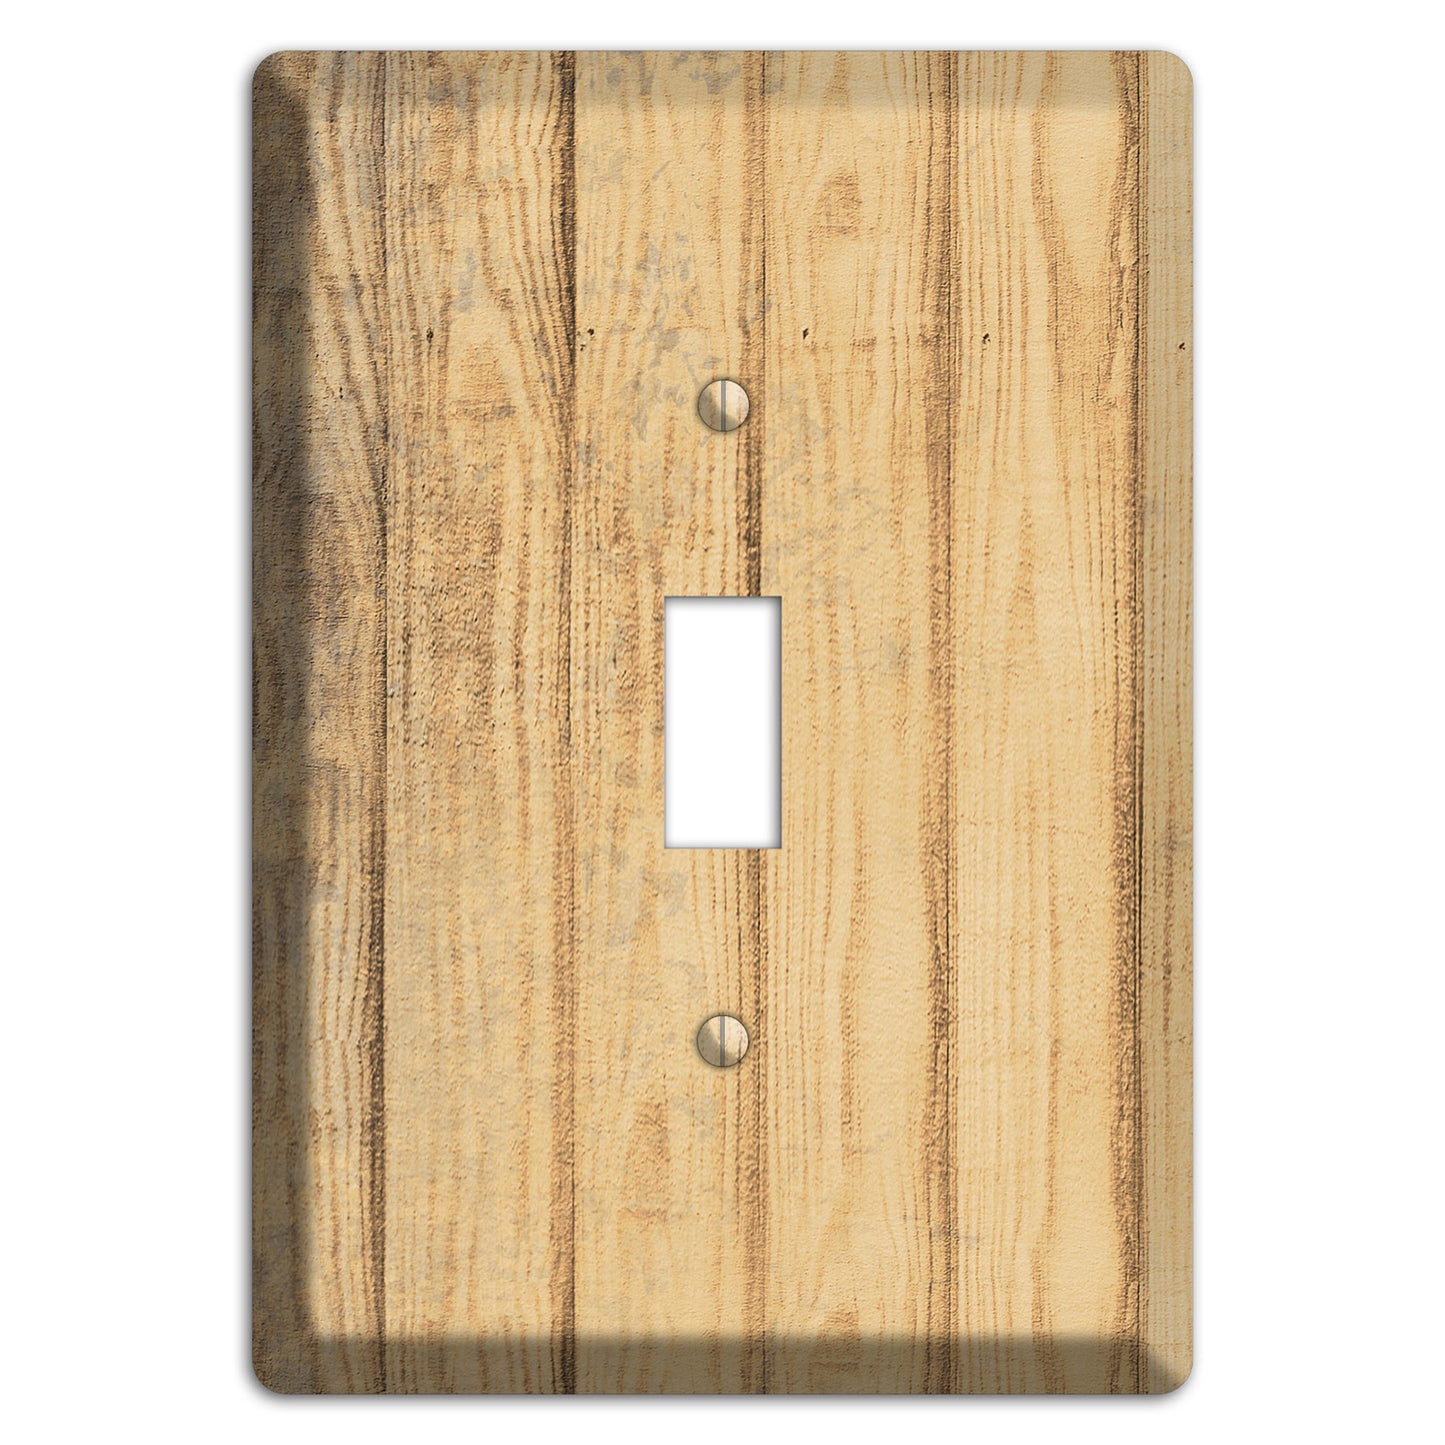 Twine Weathered Wood Cover Plates